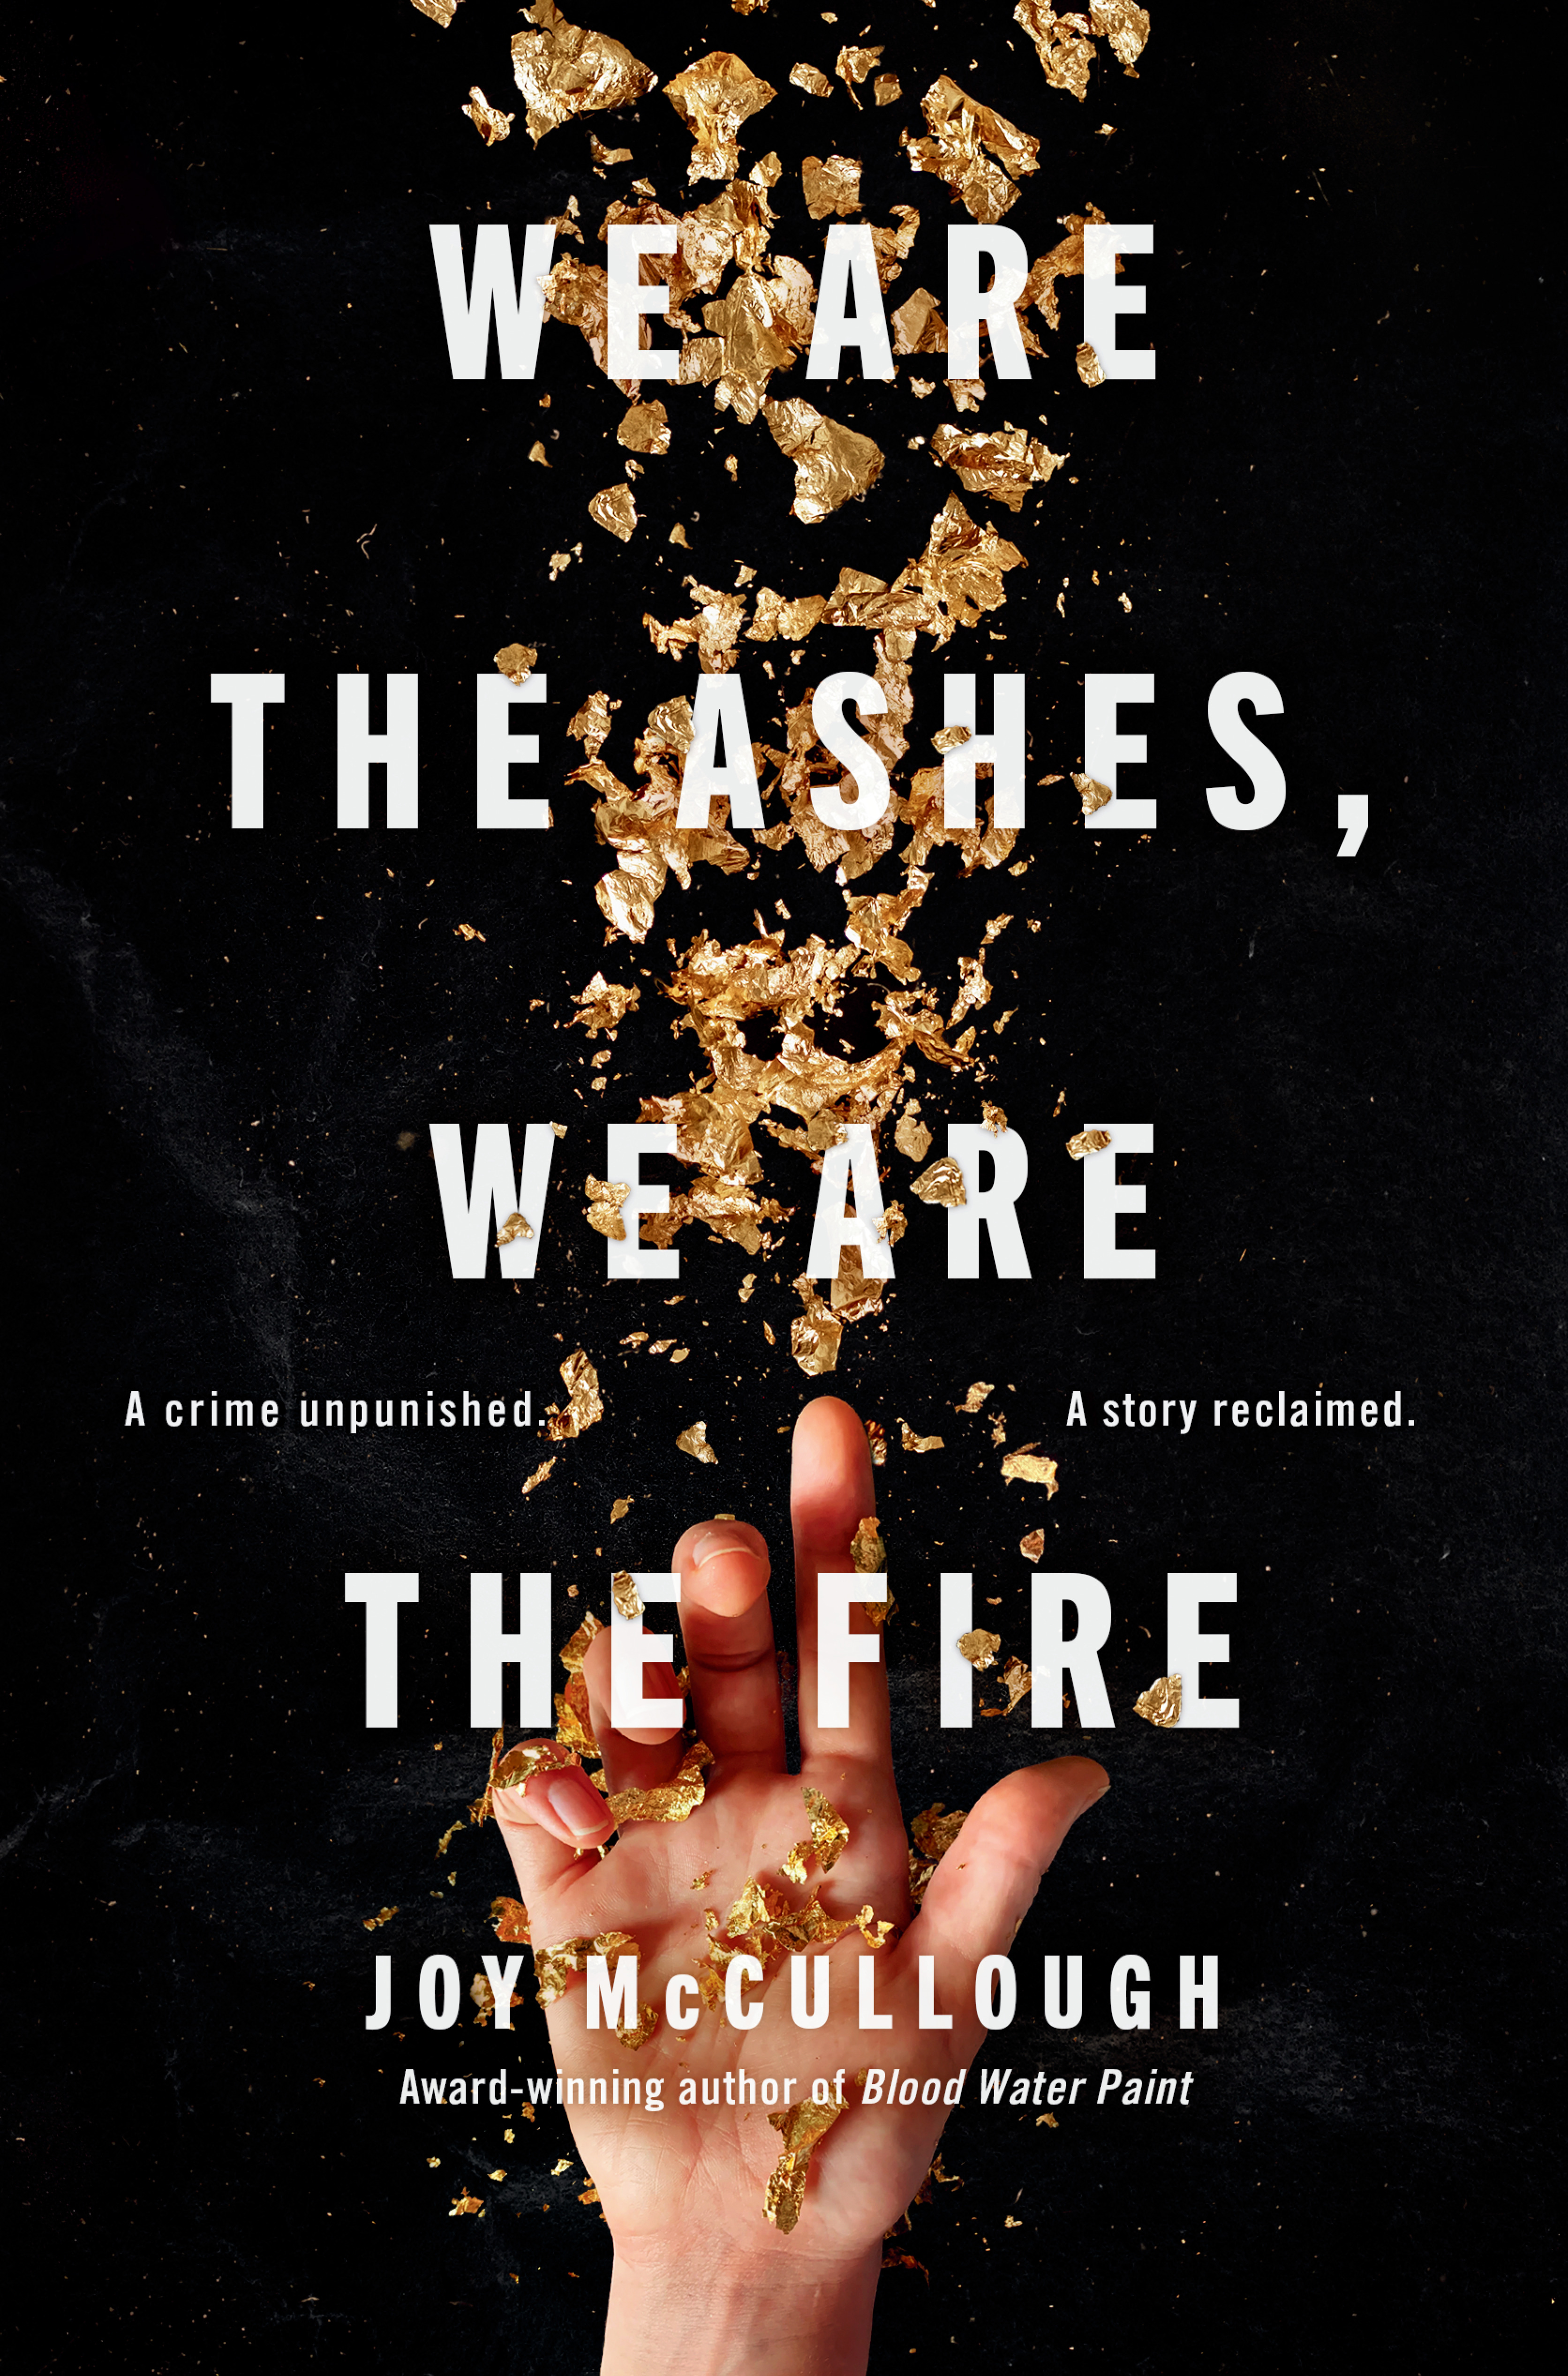 We Are the Ashes, We Are the Fire | McCullough, Joy